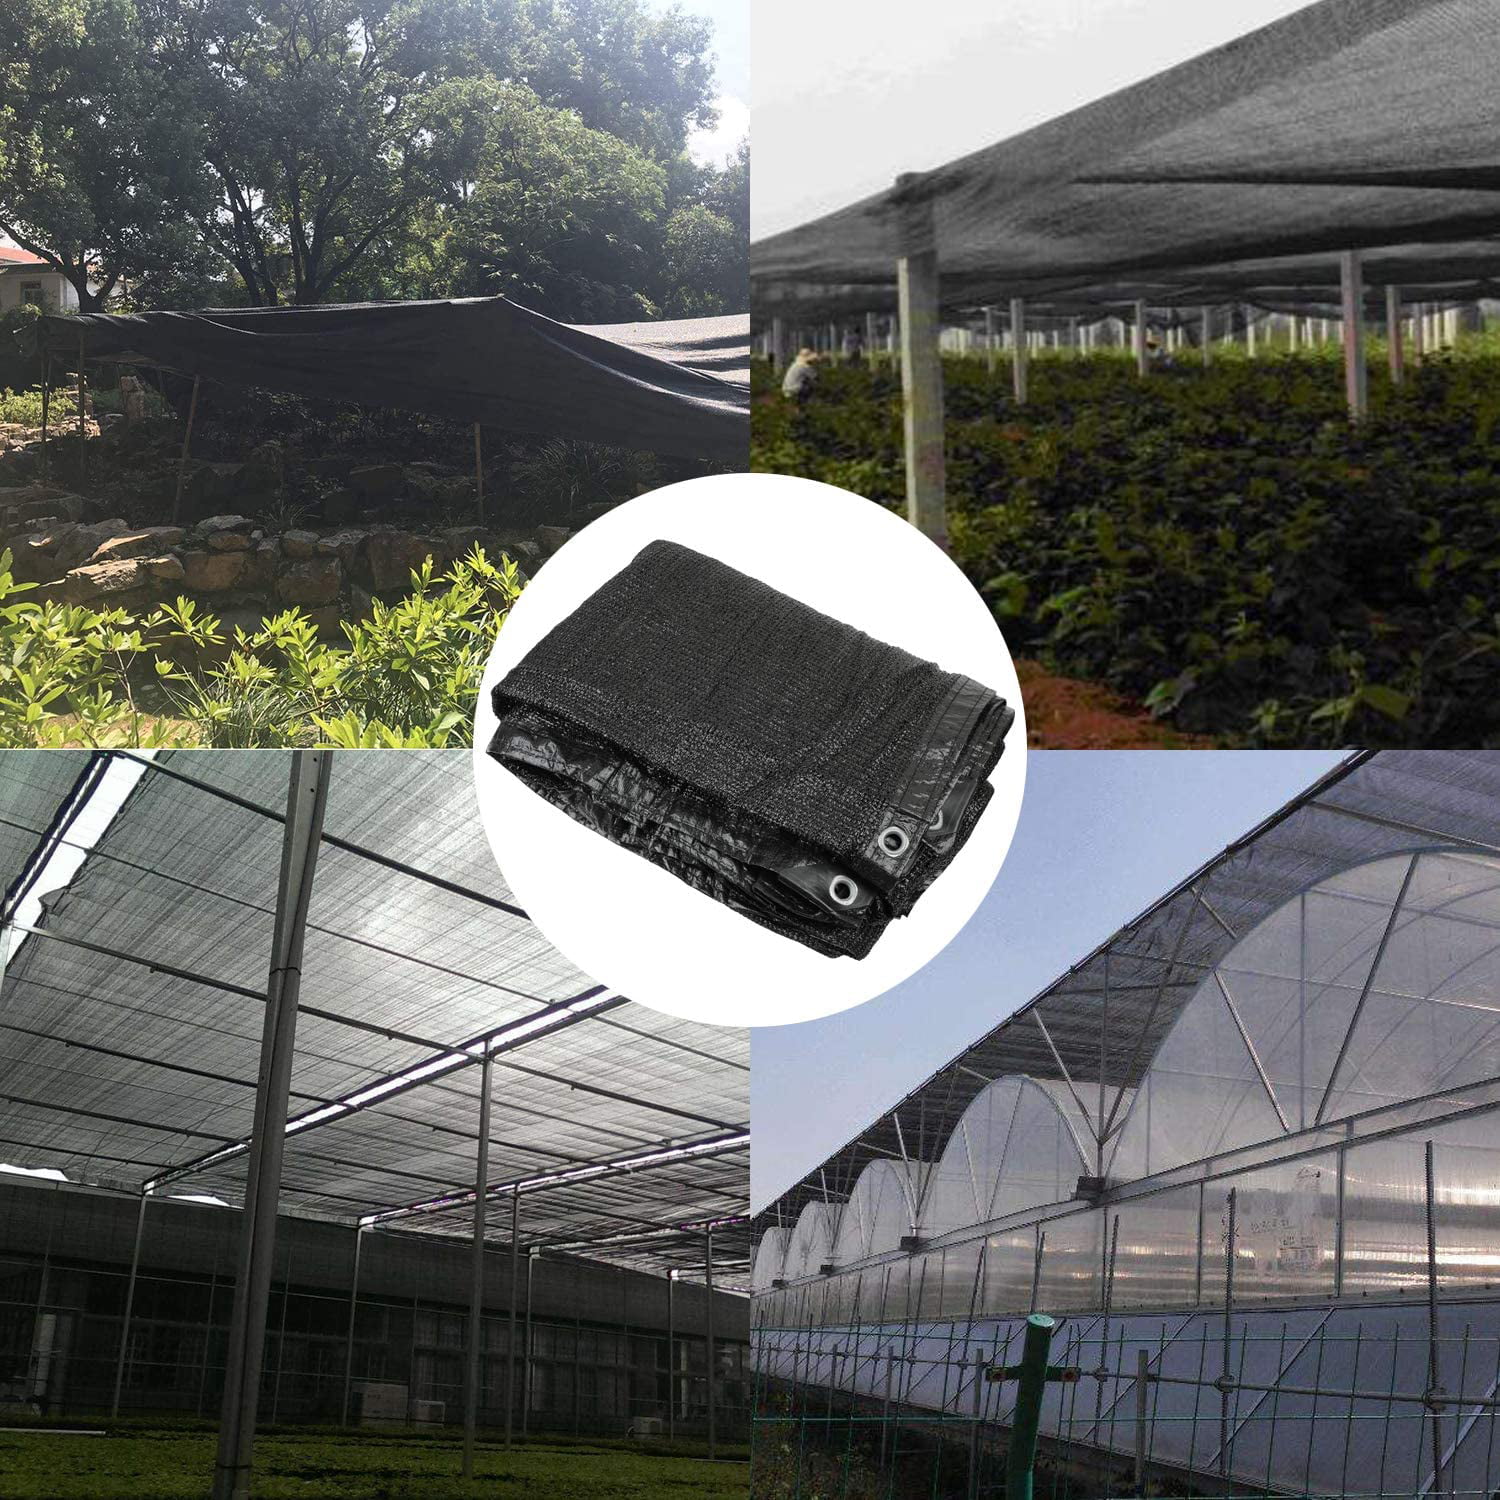 Black Bulk UV Resistant Fabric Mesh for Greenhouse Shade Cloth Taped Edge with Gromments Included 8pcs 6 Ball Bungee smartelf Shade Cloth 70% Sunblock Shade Cloth Net 6.5 ft x 6.5 ft 